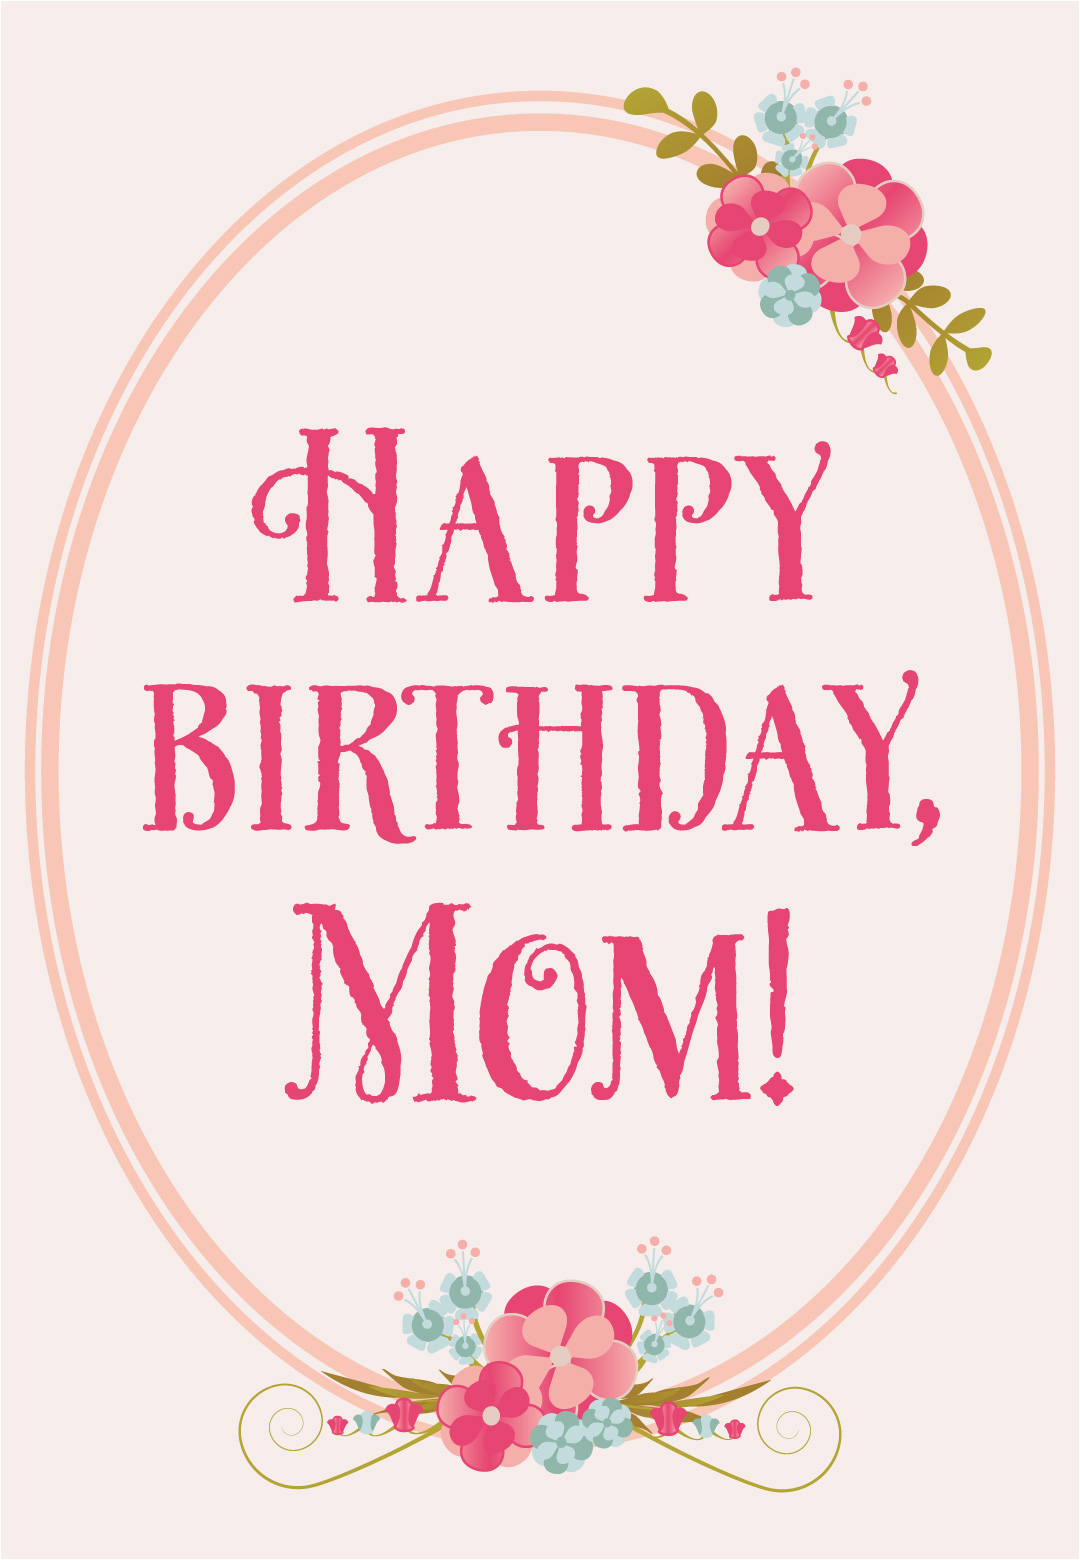 Online Birthday Cards for Mom Floral Birthday for Mom Free Birthday Card Greetings